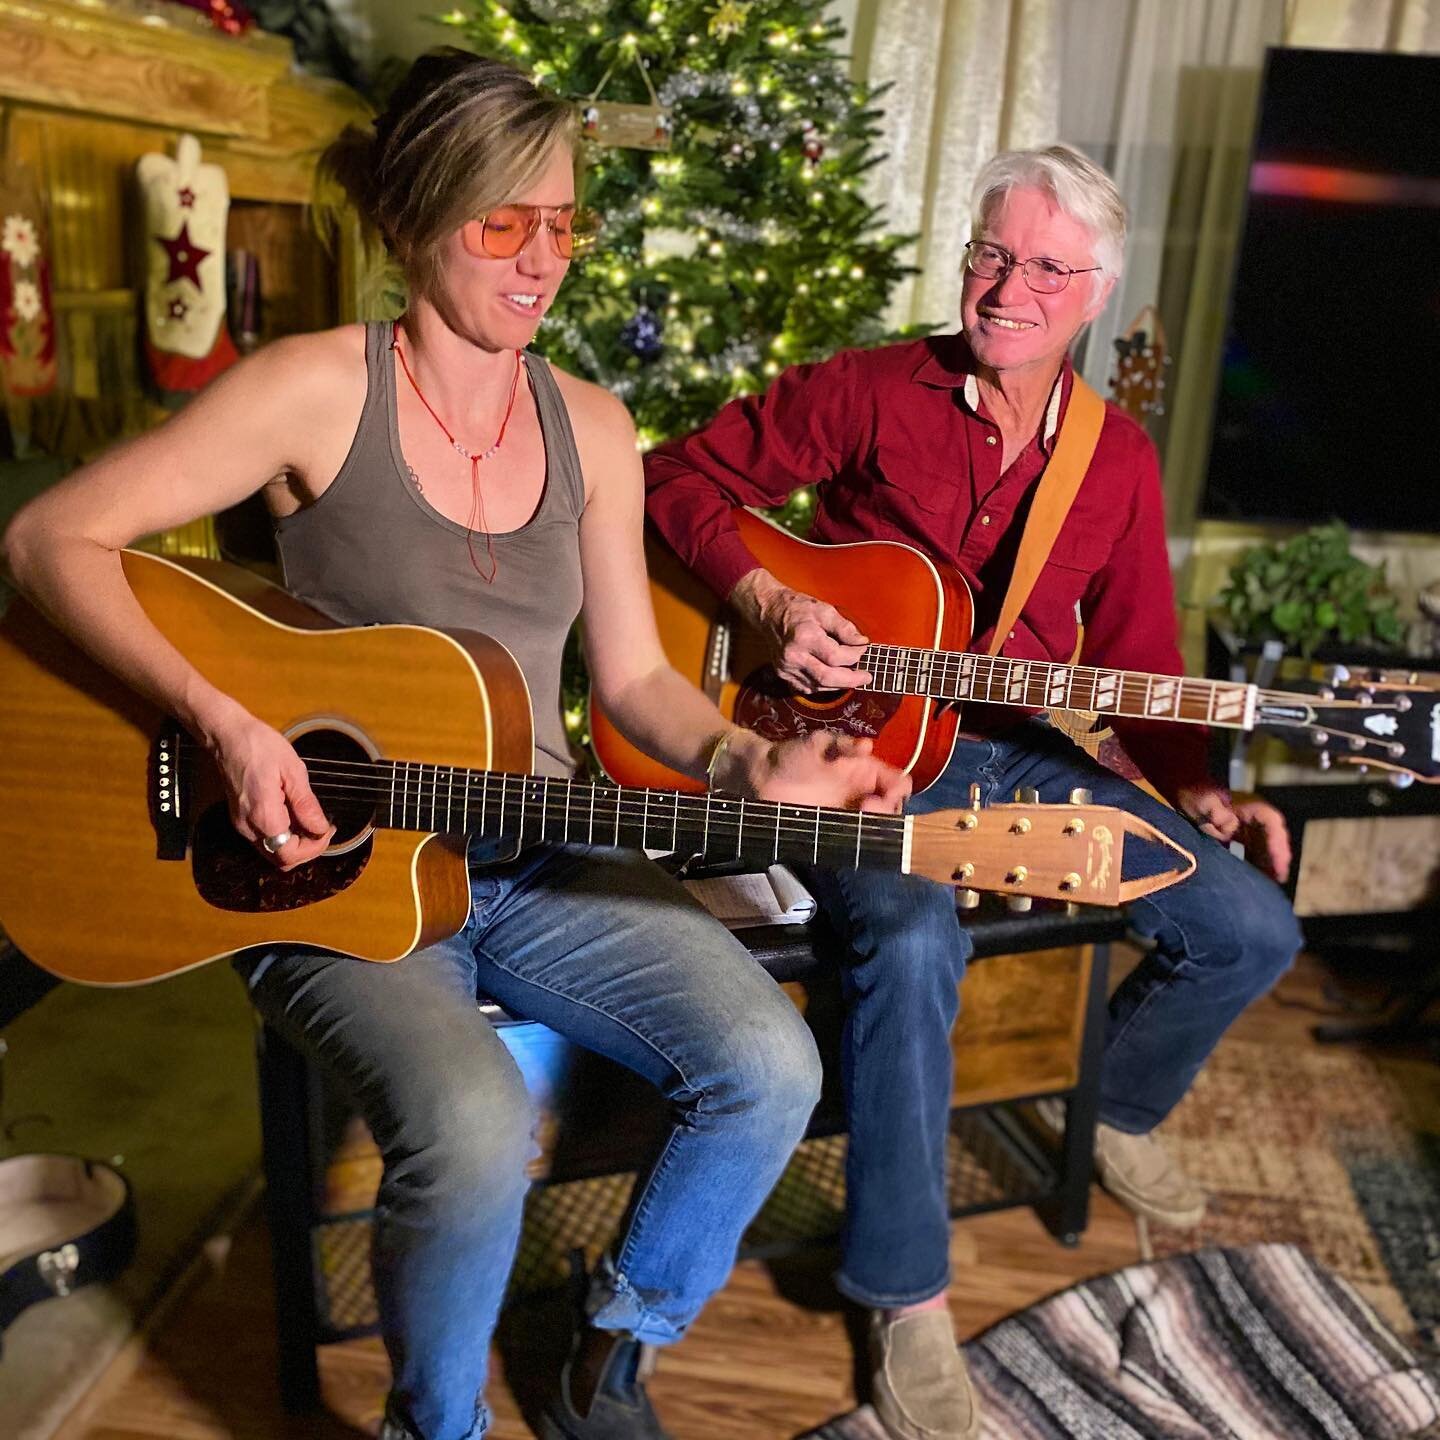 While I was home for the holidays my dad &amp; I did a live stream. We&rsquo;ve been working on singing harmonies together and taking turns leading songs.
A lil about this photo... mom finally made the transition from samsung to iphone 11. I helped s